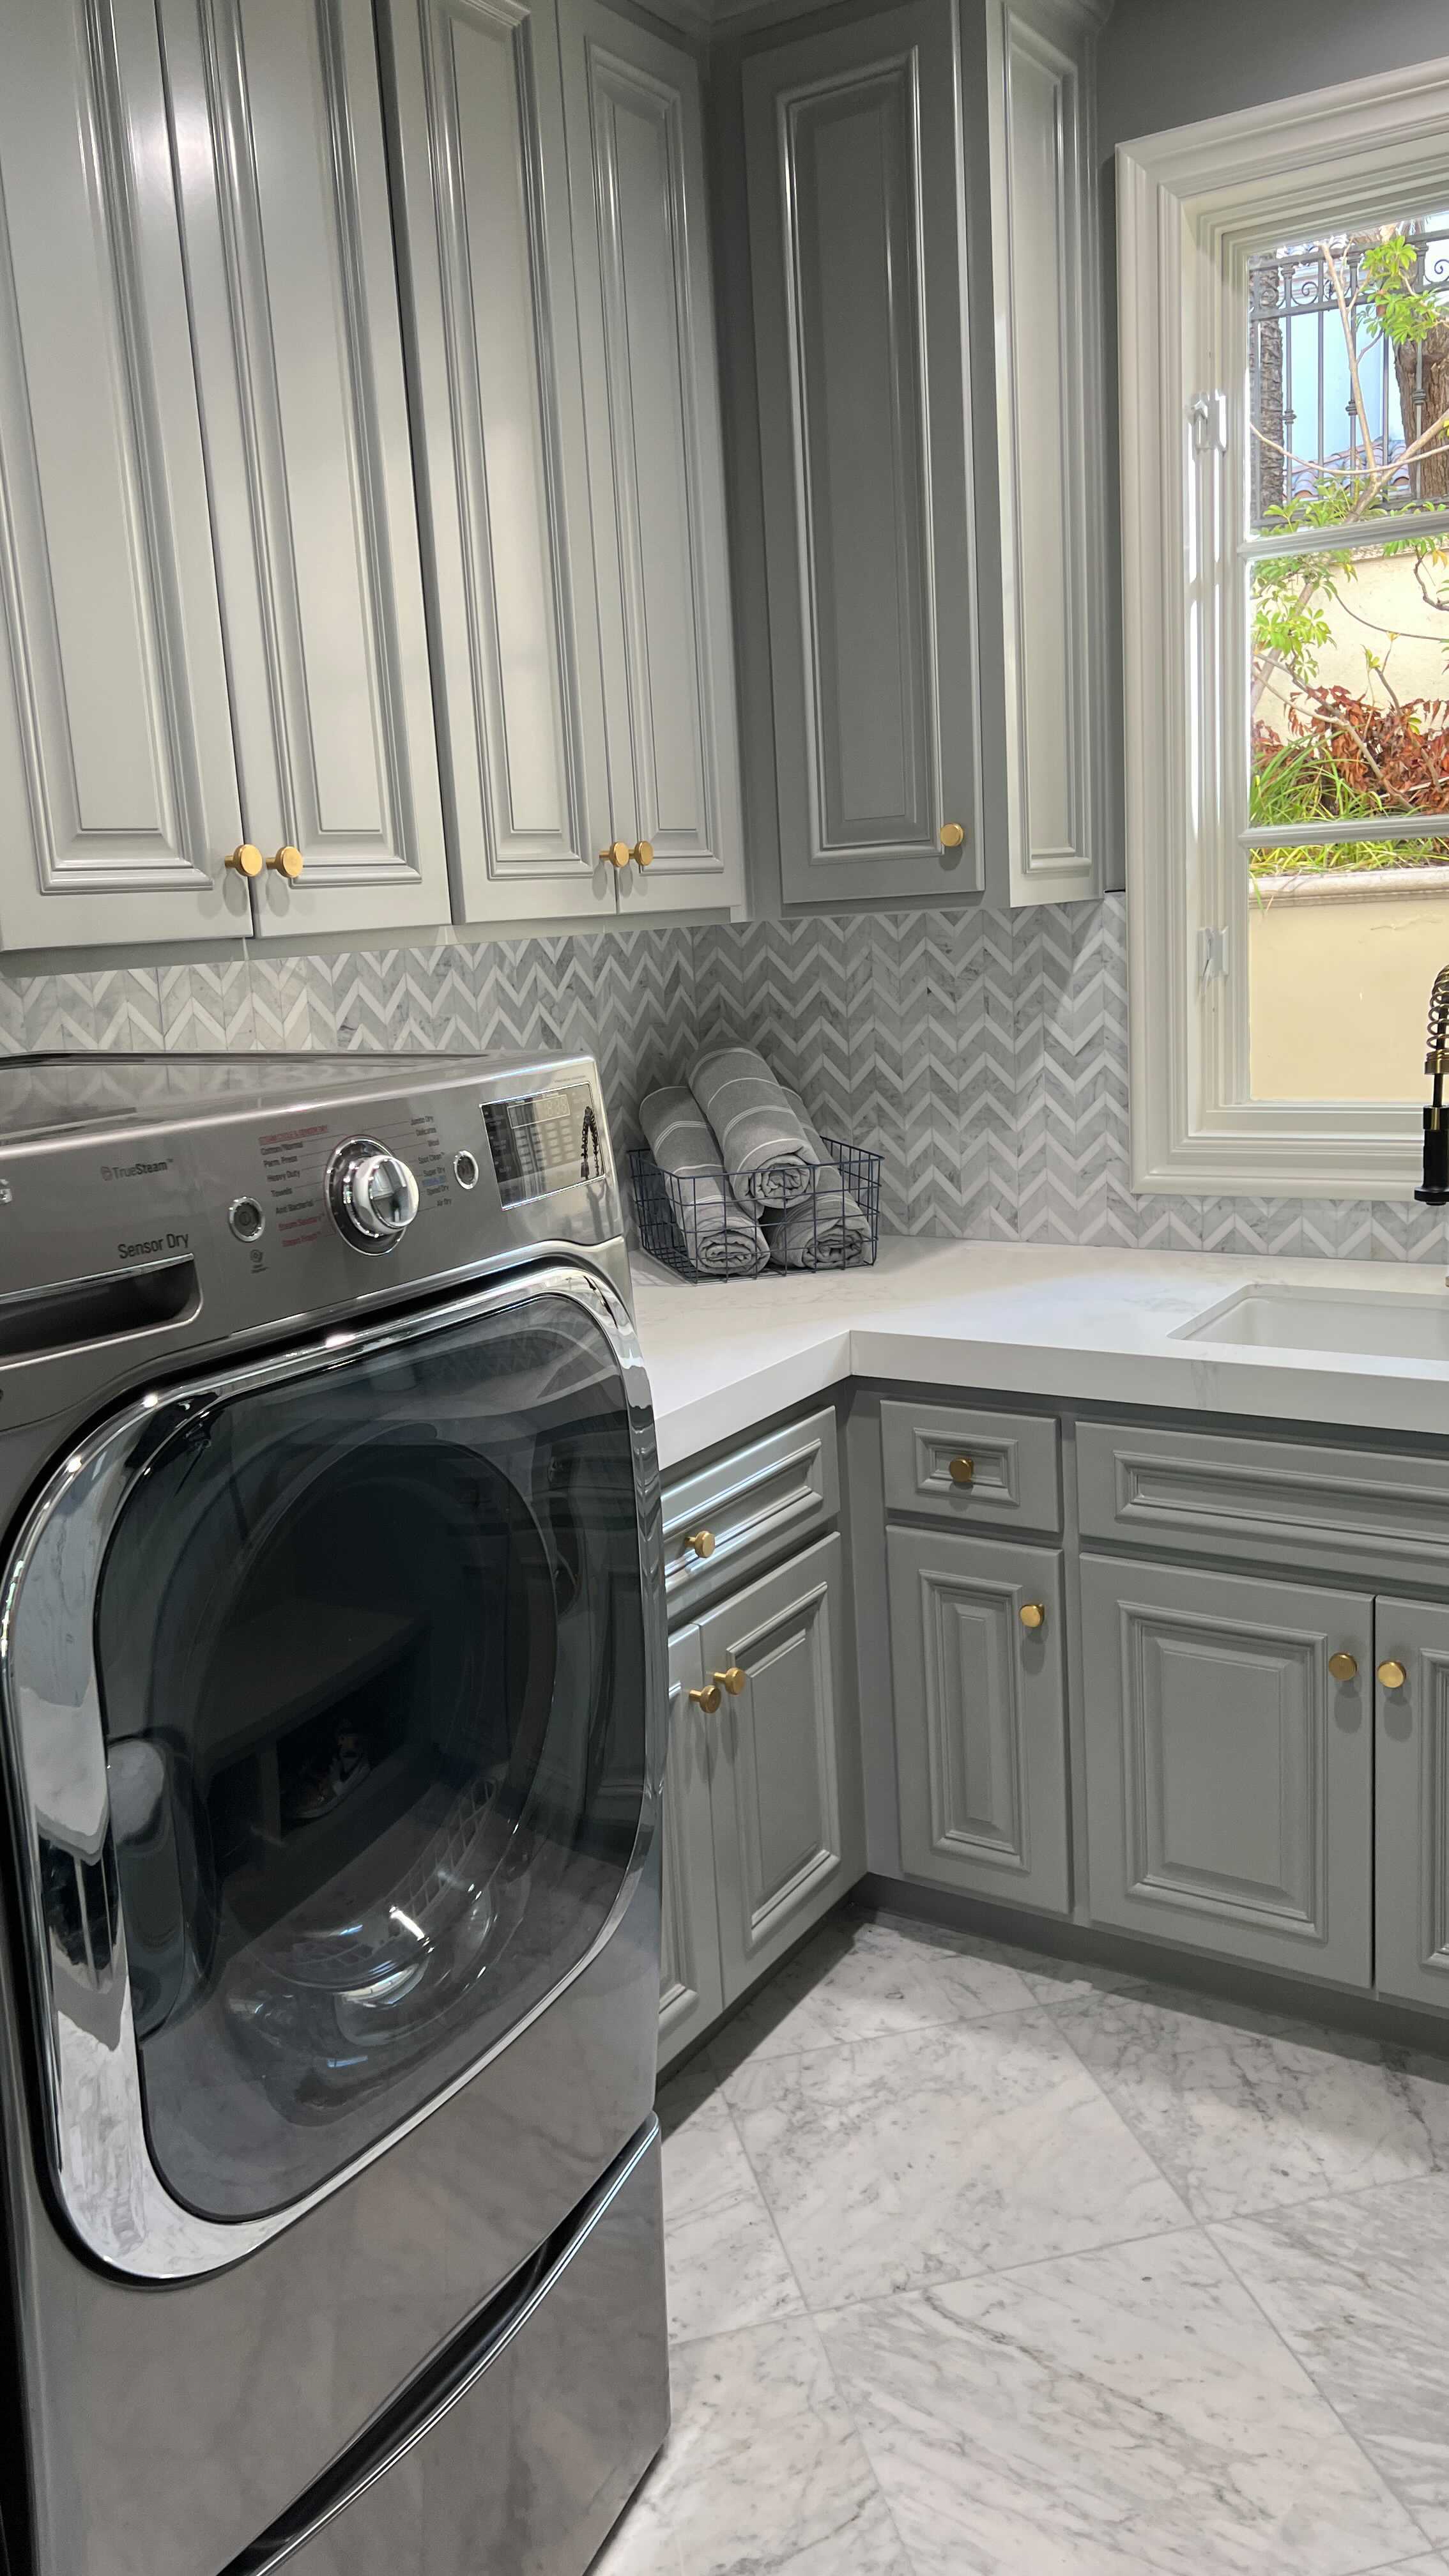 We are excited to share the 2nd project reveal in @oclydia and @ocdoug’s home makeover! Their new laundry room turned out beautiful with its timeless color palette and fun chevron backsplash from our Bizou collection. Also featuring our Bianco Gioia marble on the floors.  #emsertile